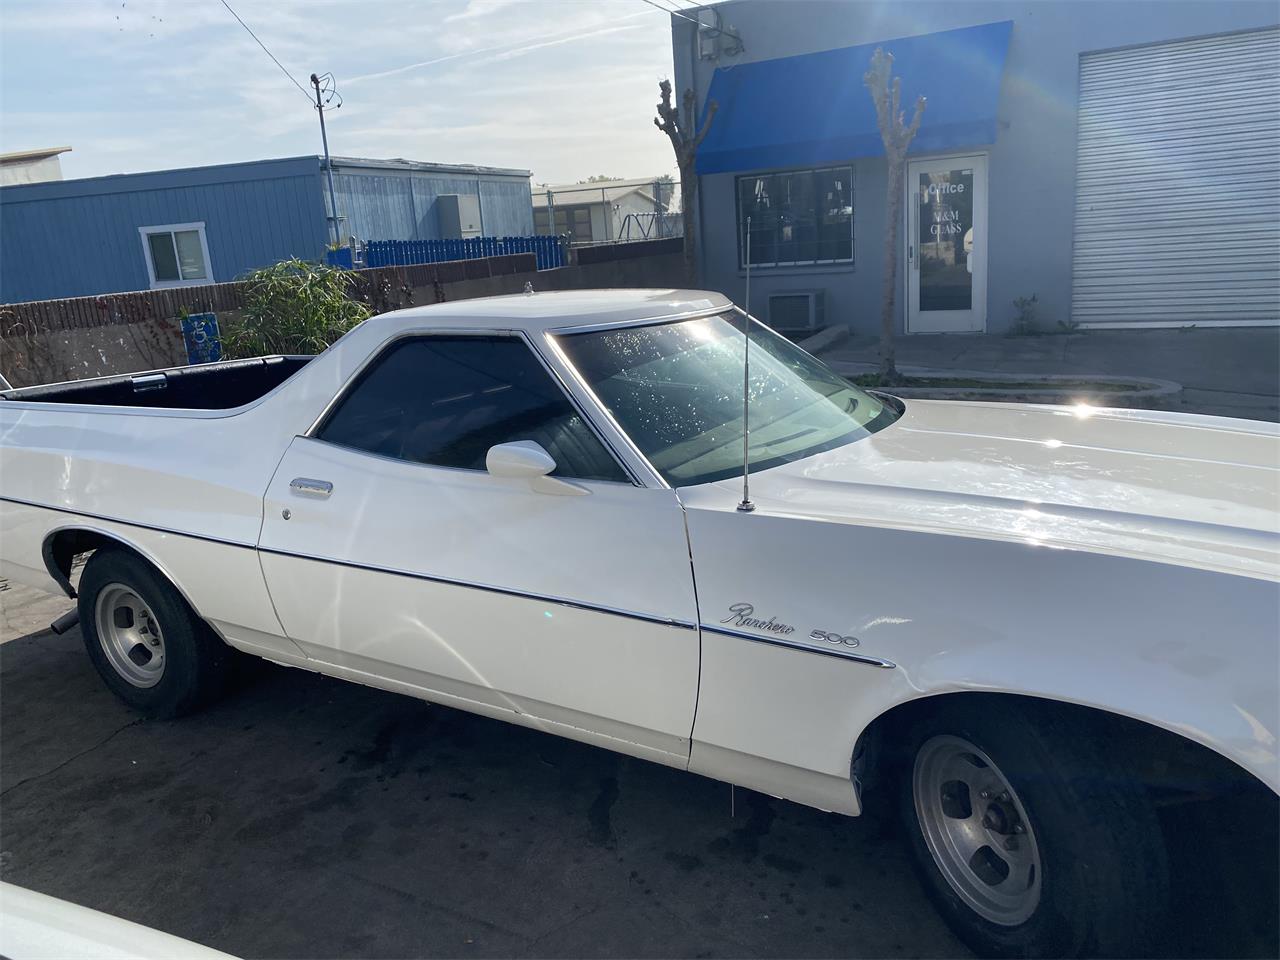 1976 ford ranchero 500 for sale classiccars com cc 1318866 1976 ford ranchero 500 for sale